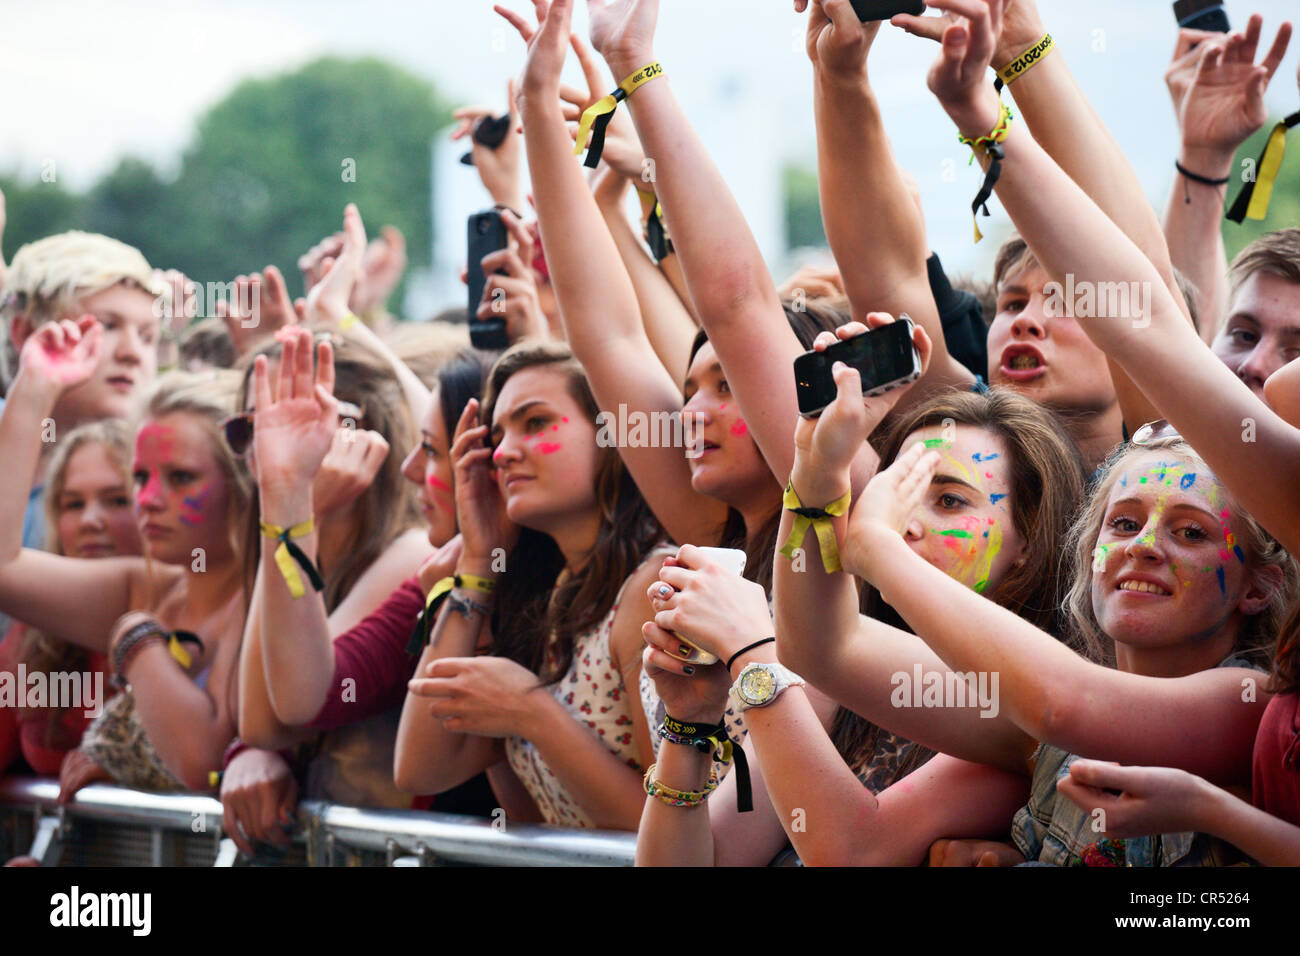 Painted Faces in the Front Row during Rizzle Kicks at Evolution Festival 2012 at Spillers Wharf in Newcastle upon Tyne UK Stock Photo